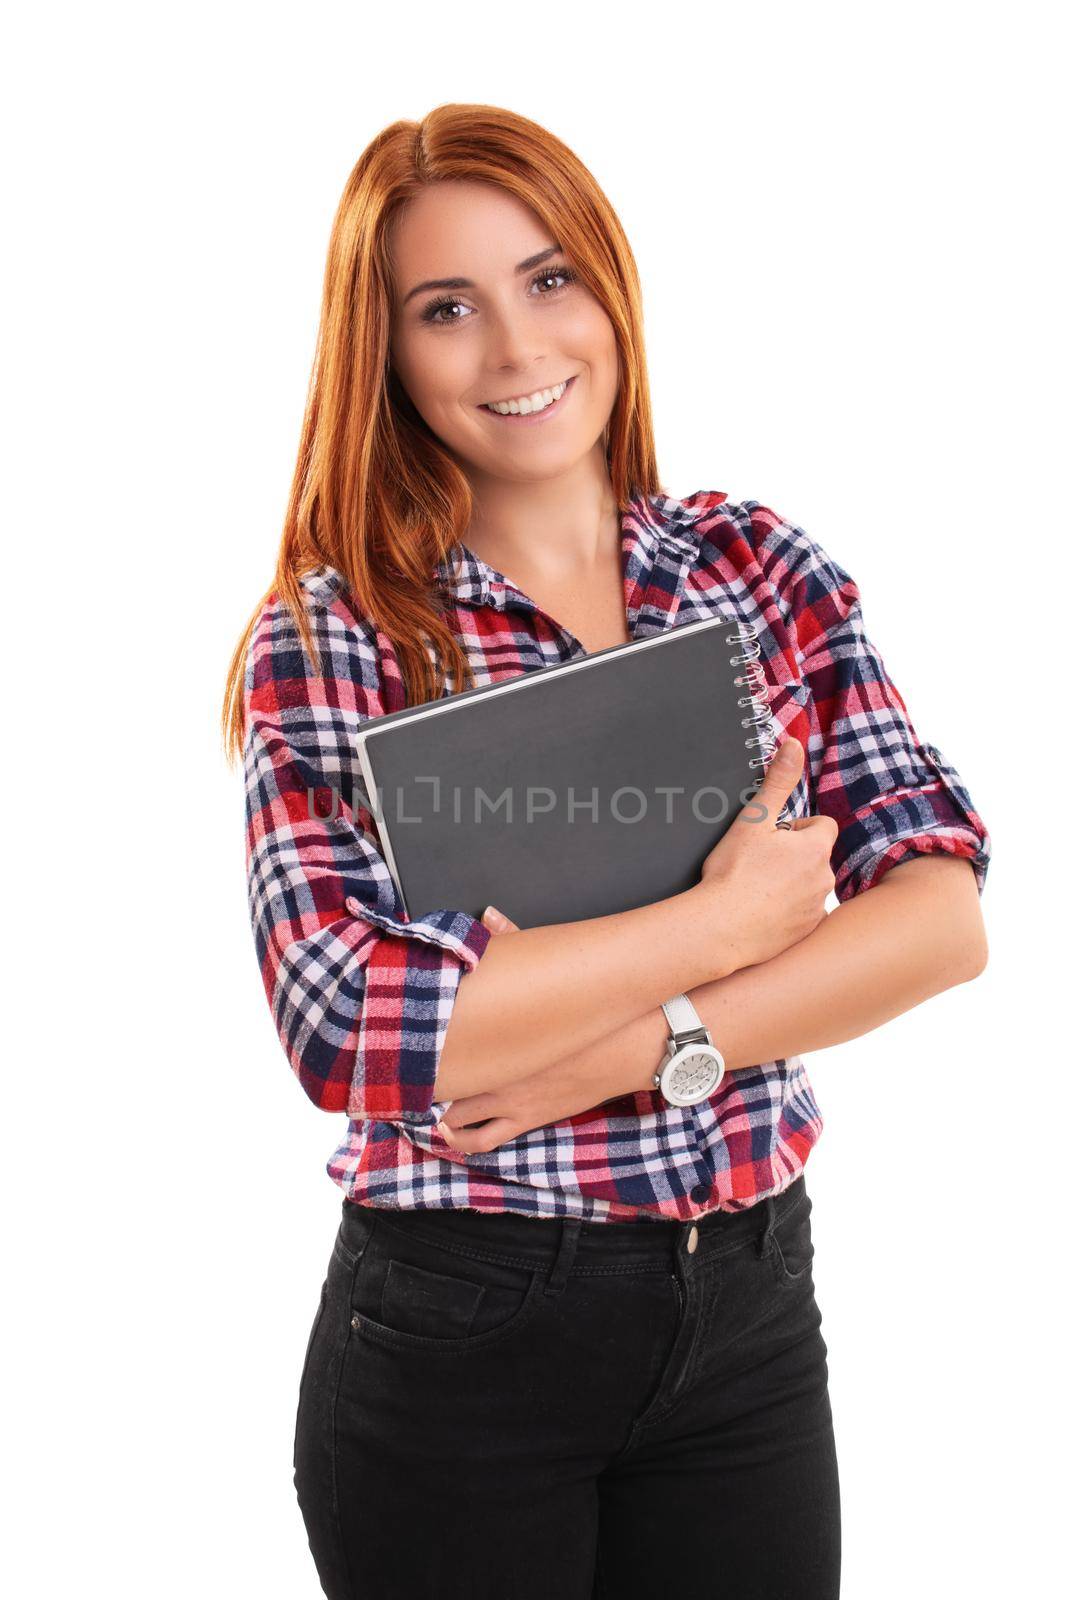 Smiling young woman holding a notebook by Mendelex